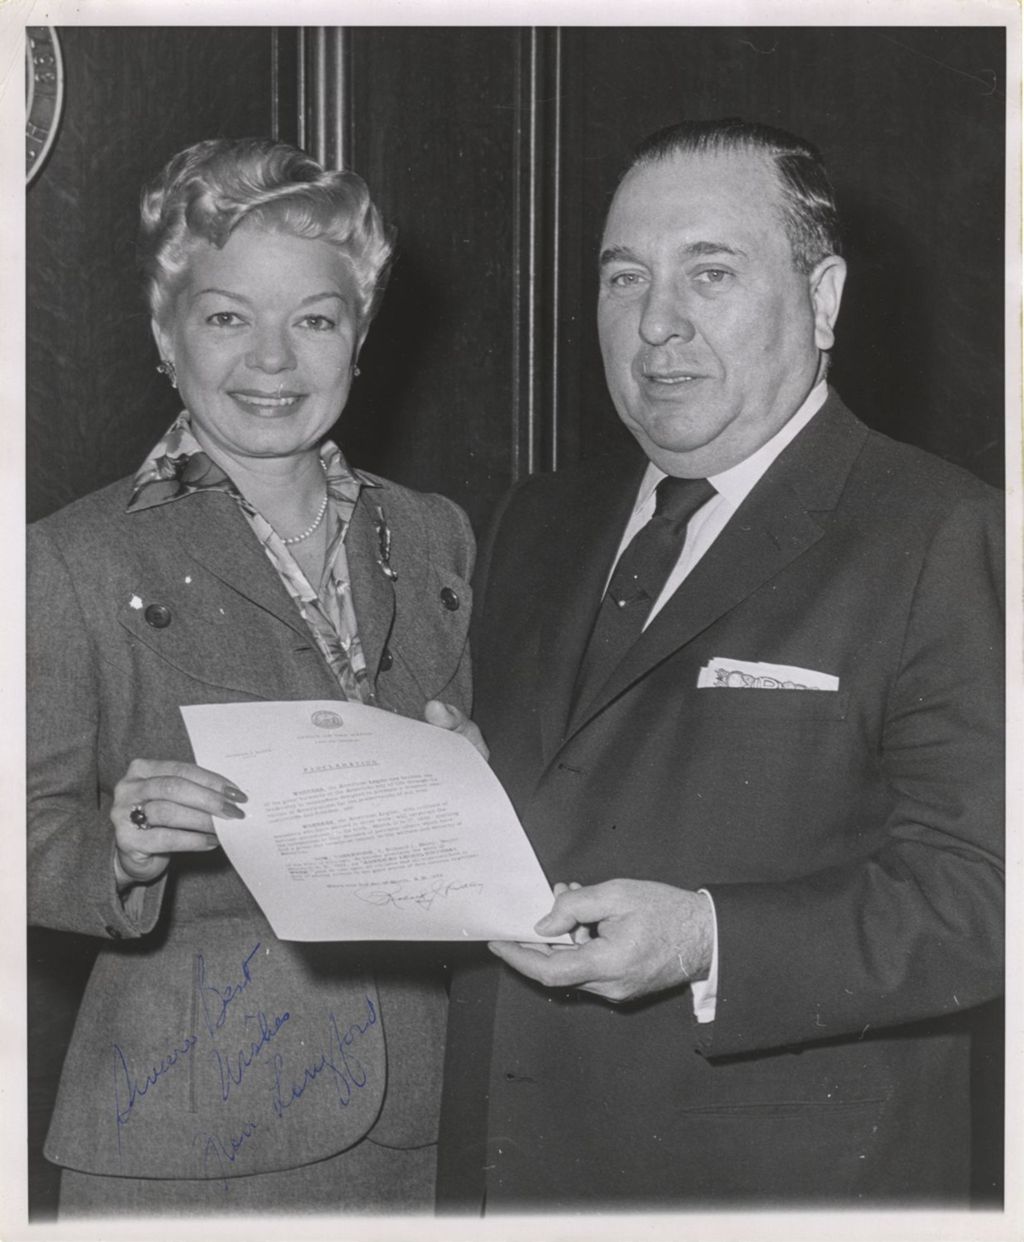 Miniature of Frances Langford and Richard J. Daley displaying a proclamation